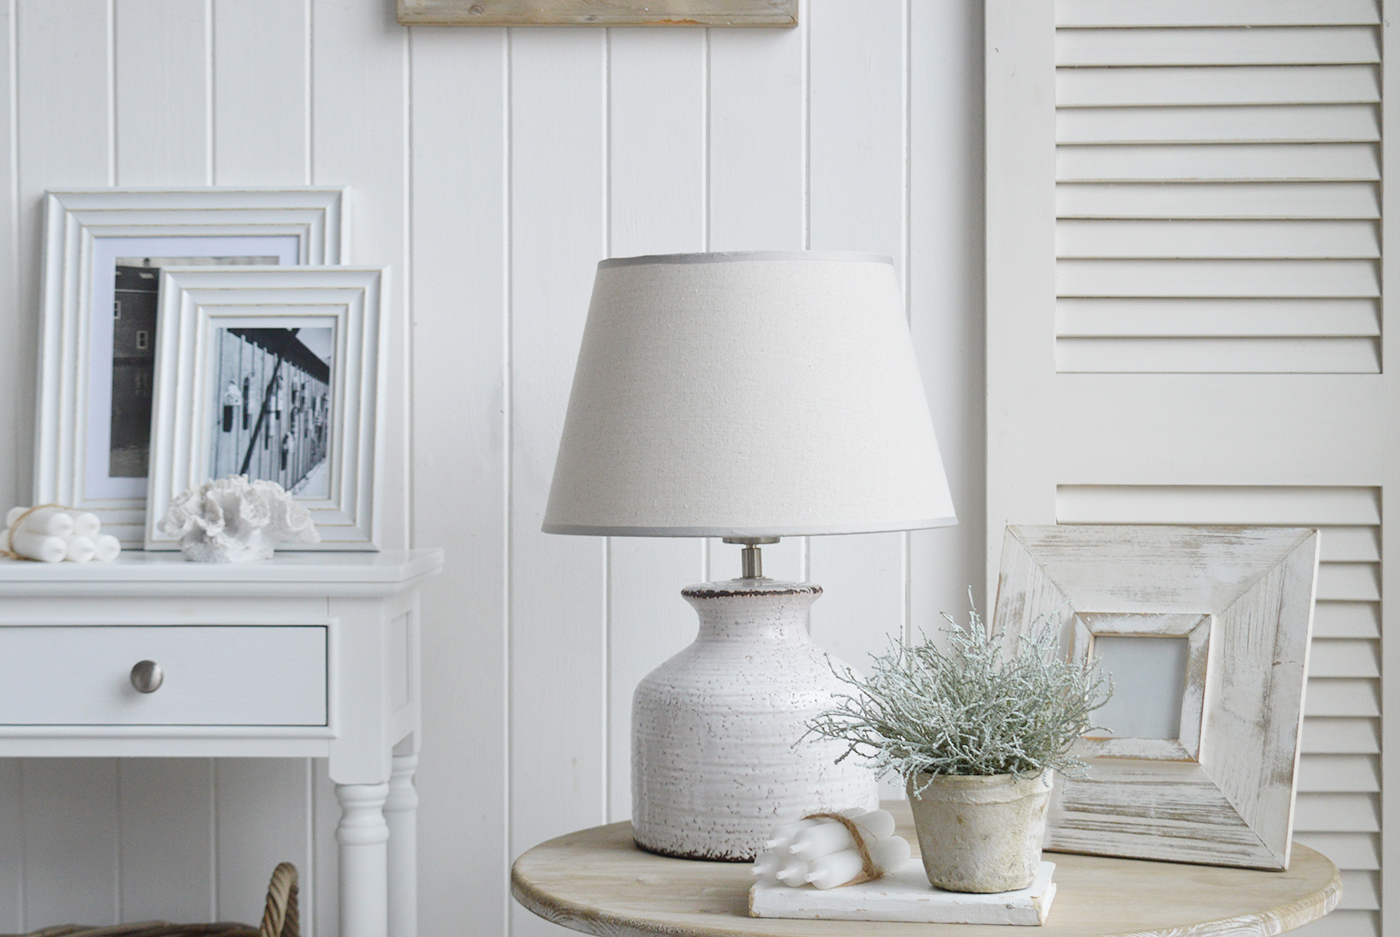 The White Compton white ceramic lamp with a glazed finish for modern farmhouse interiors in UK